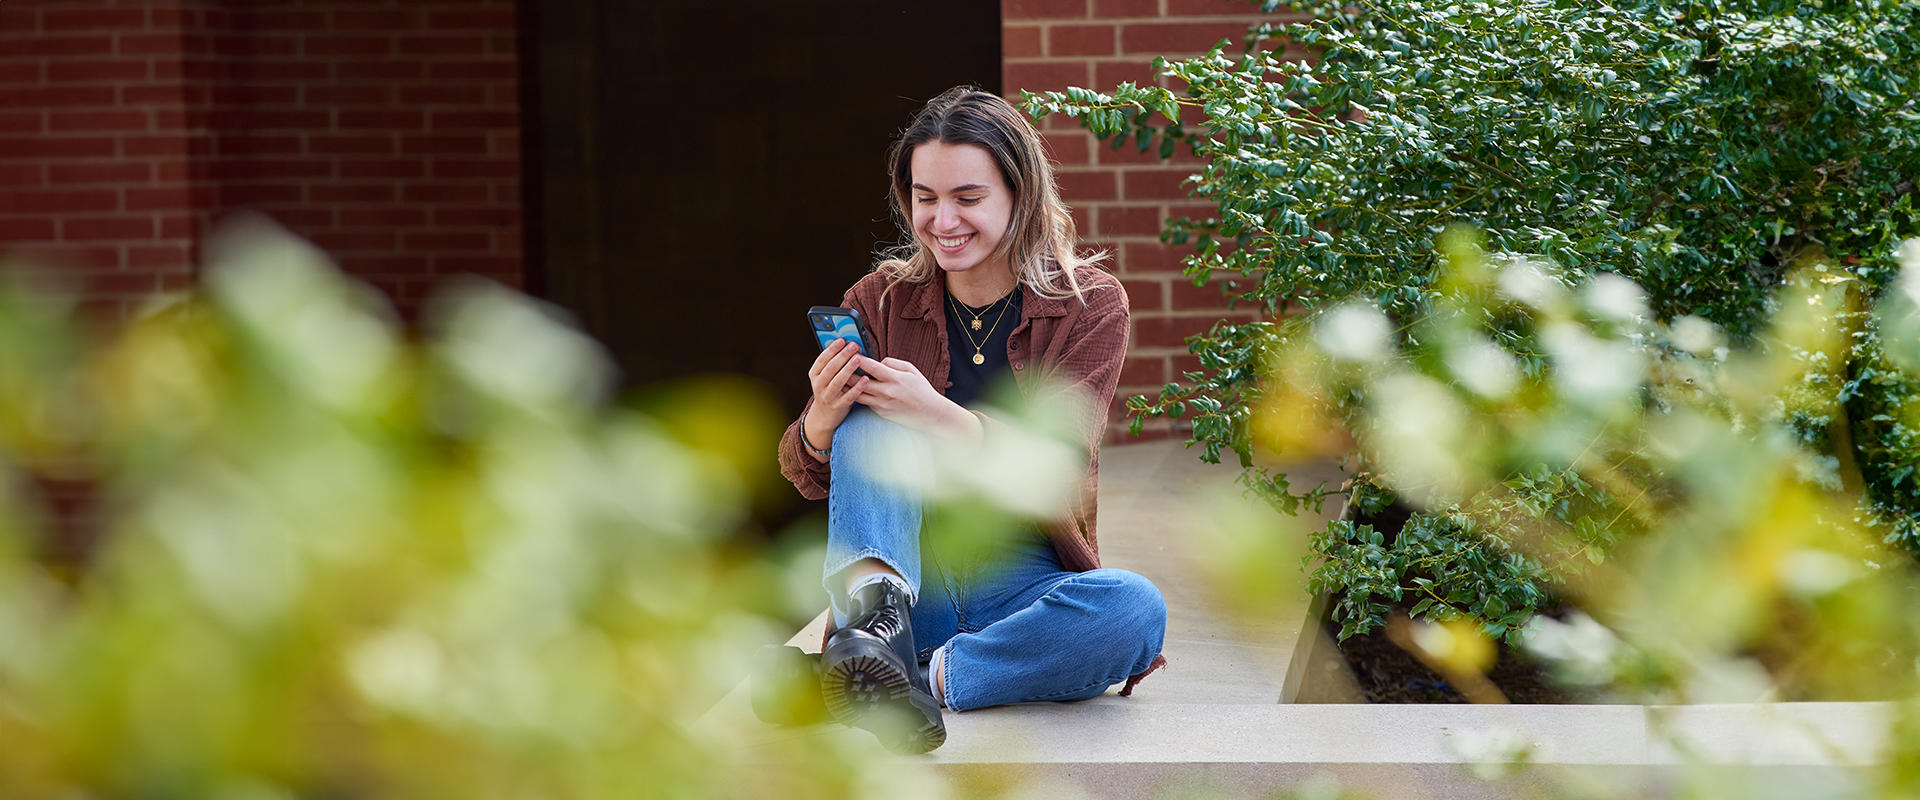 Student seated outside her residence hall using her phone